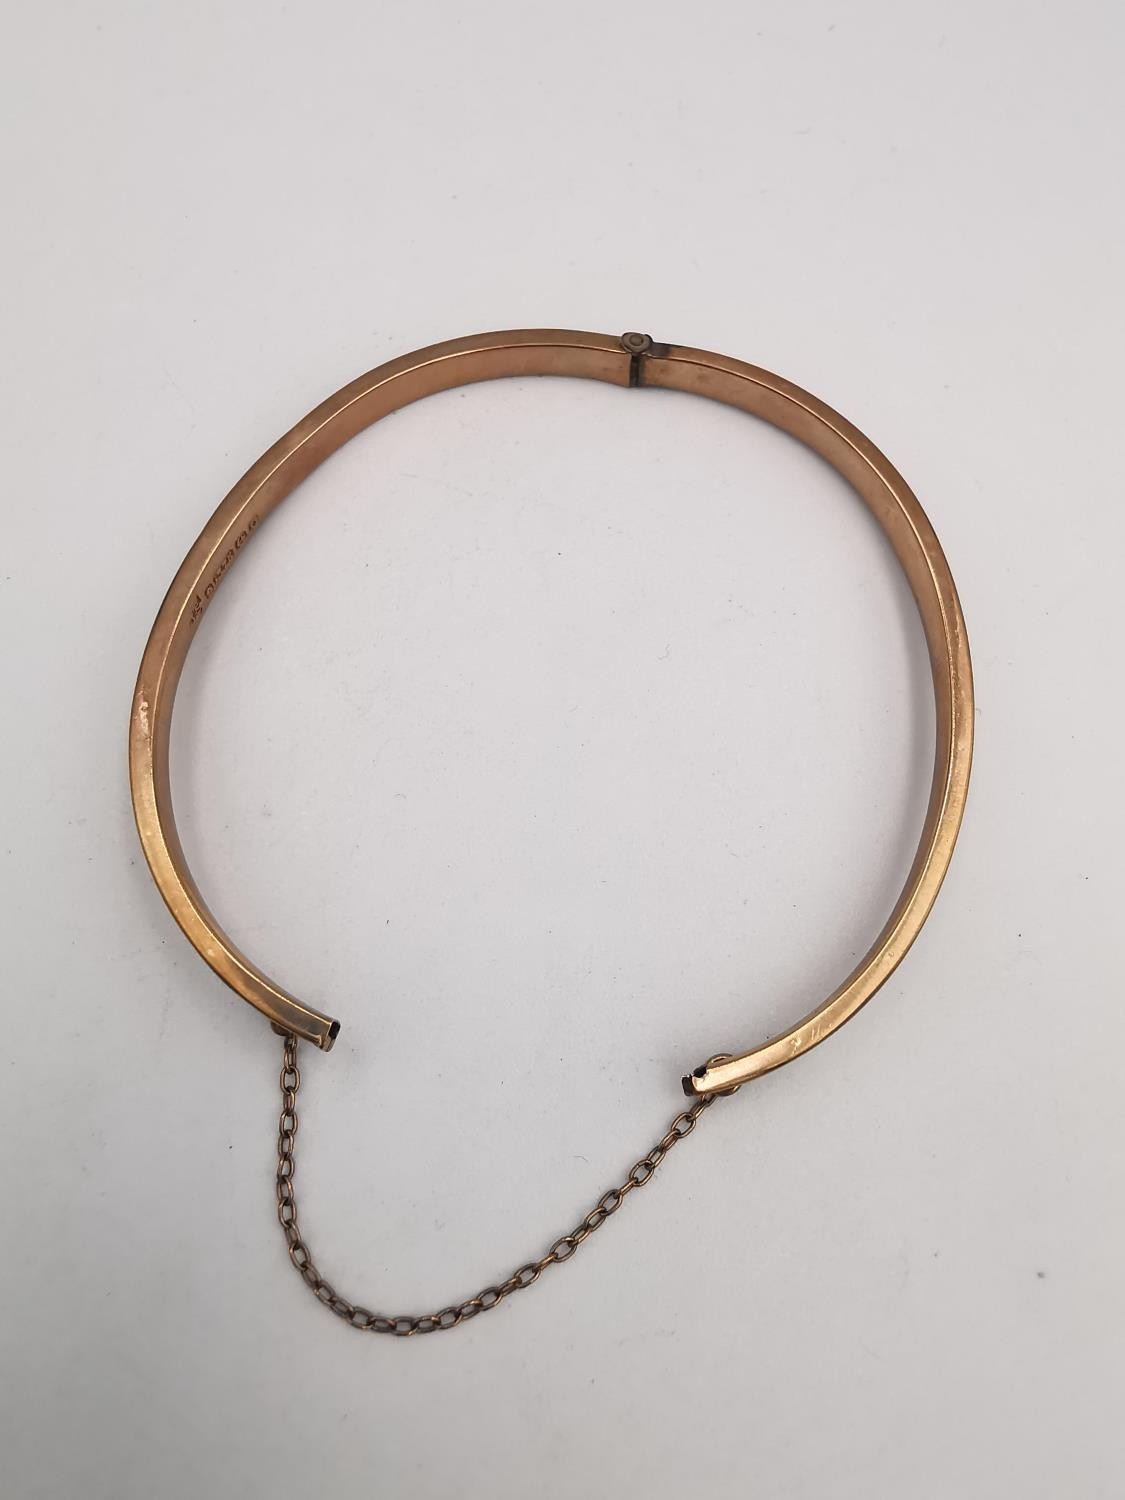 Two 9ct yellow gold chains and a rose gold hollow bangle with safety chain (clasp missing). One - Image 5 of 7